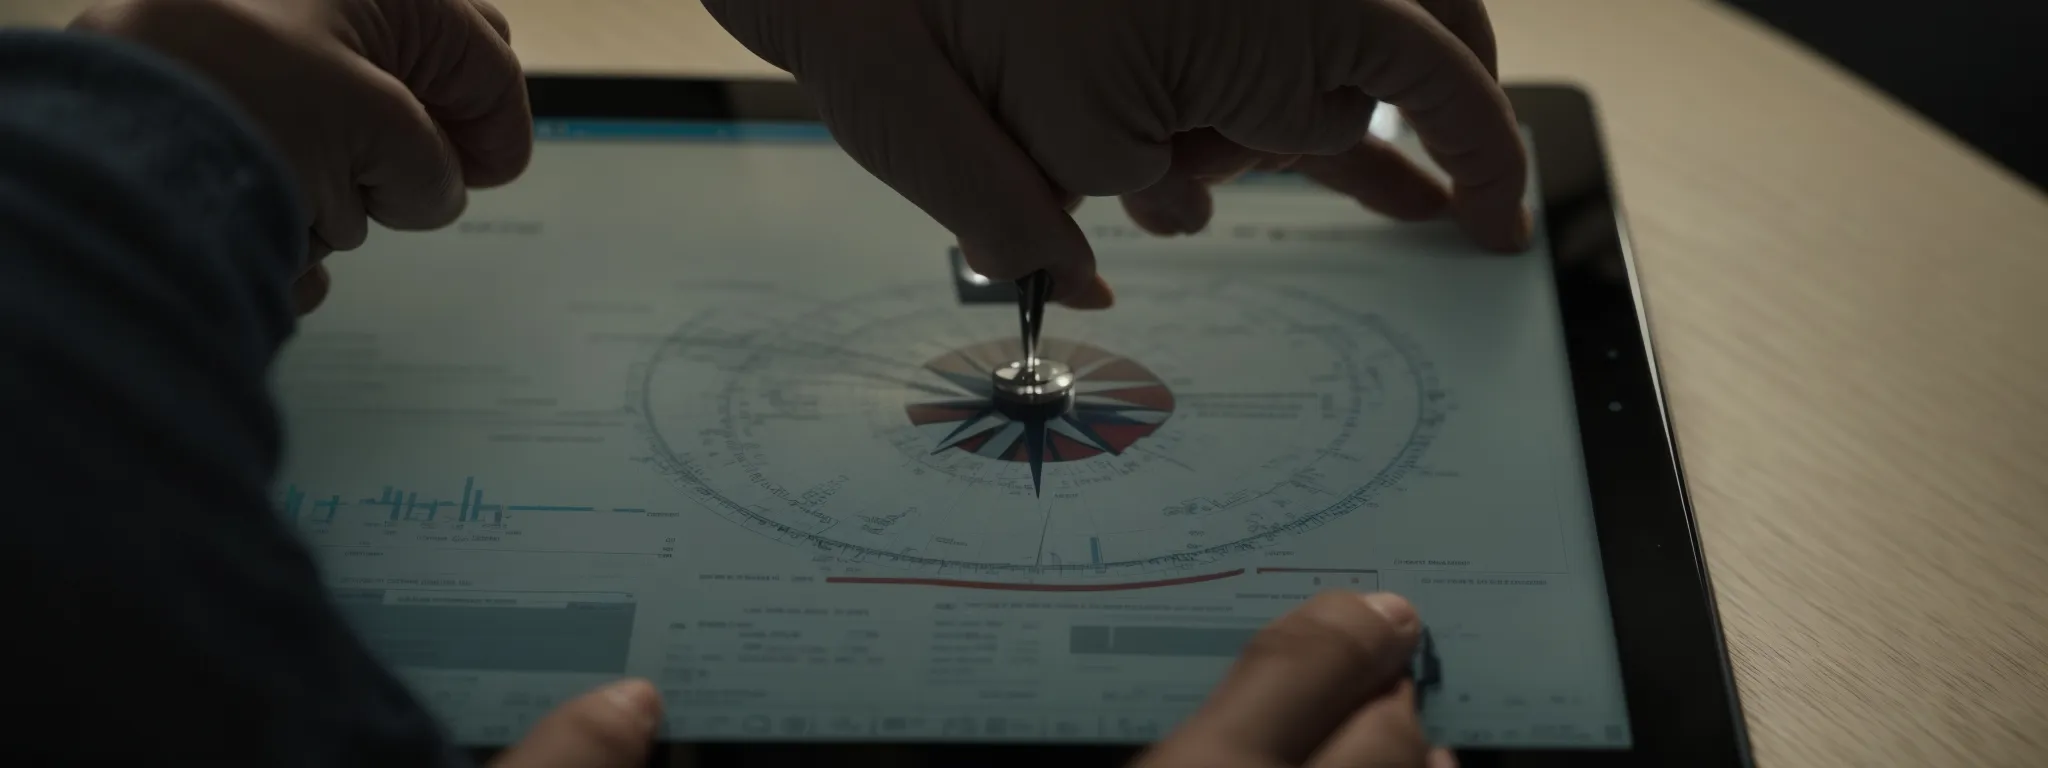 a person examining a large compass on top of a digital tablet displaying analytics graphs, symbolizing strategic navigation through seo keyword research.